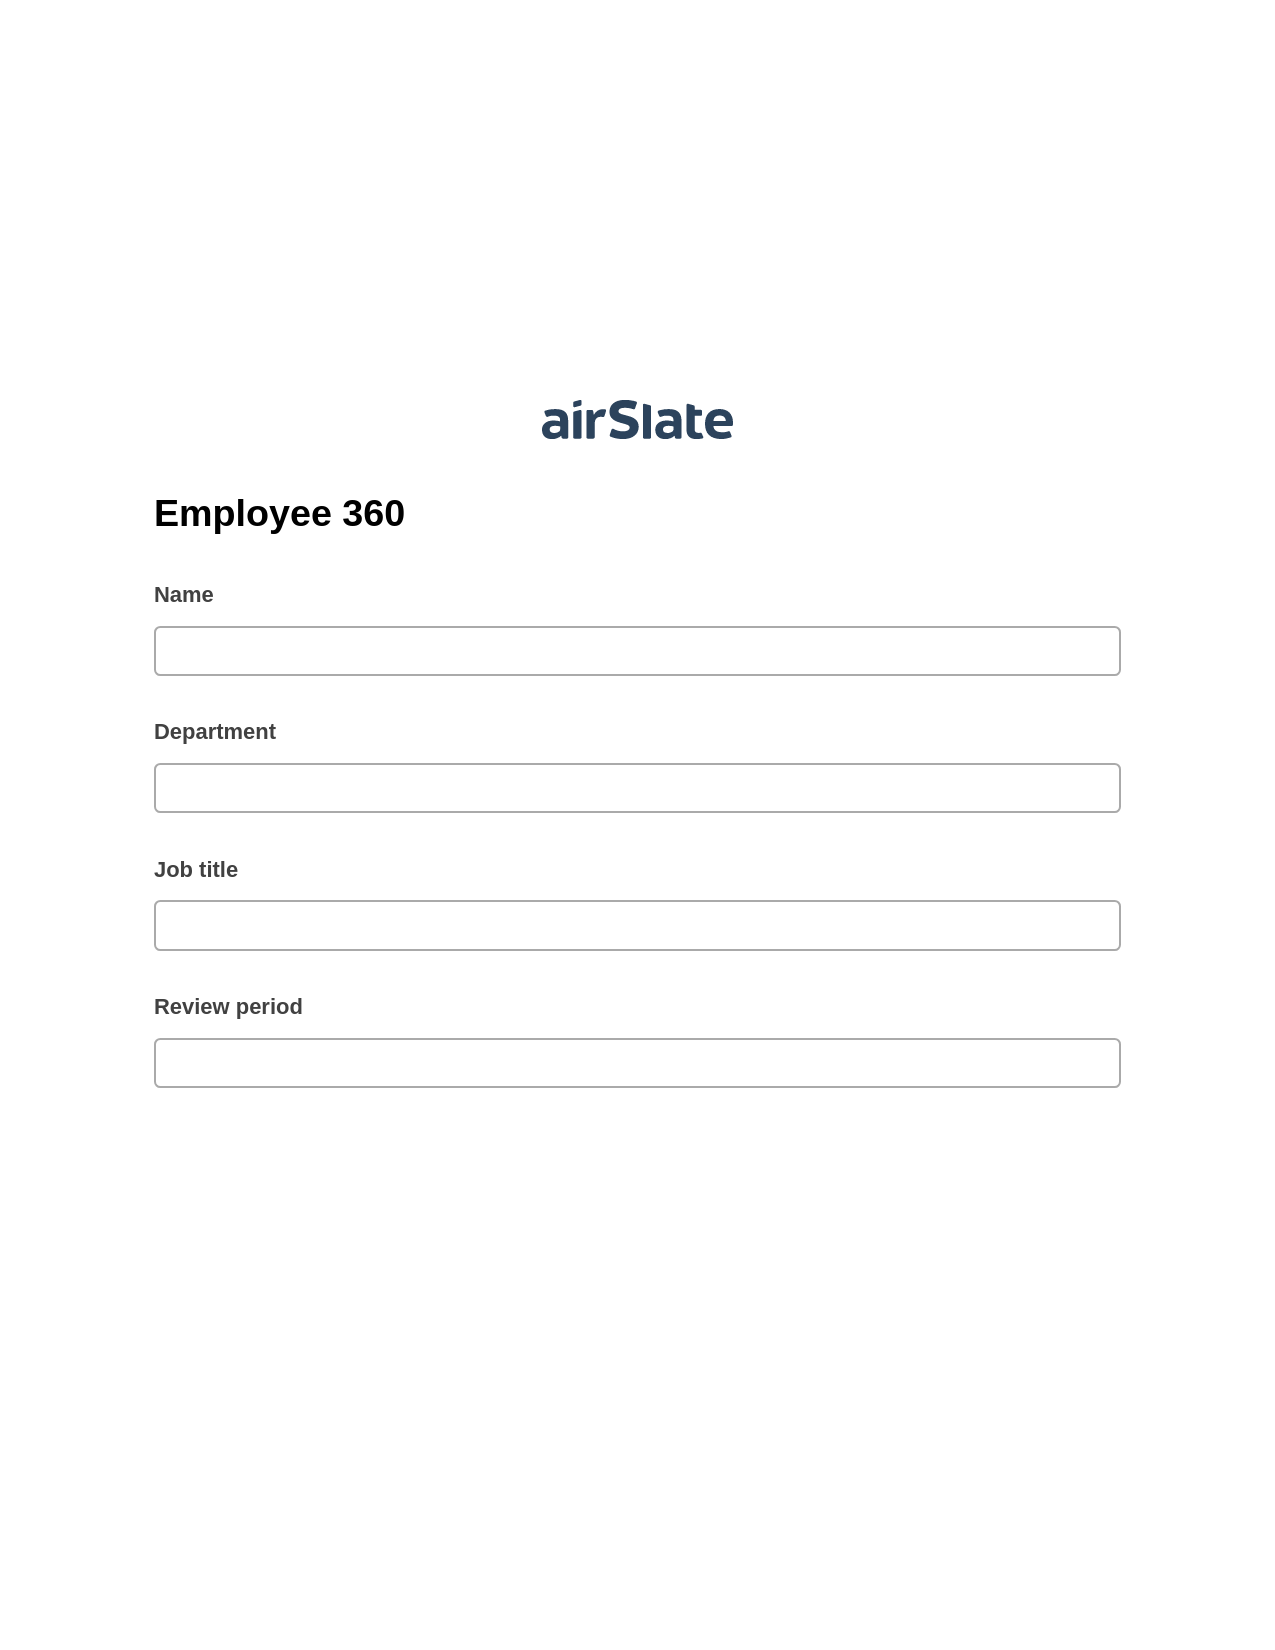 Multirole Employee 360 Pre-fill from MS Dynamics 365 Records, Export to MS Dynamics 365 Bot, Export to Salesforce Record Bot